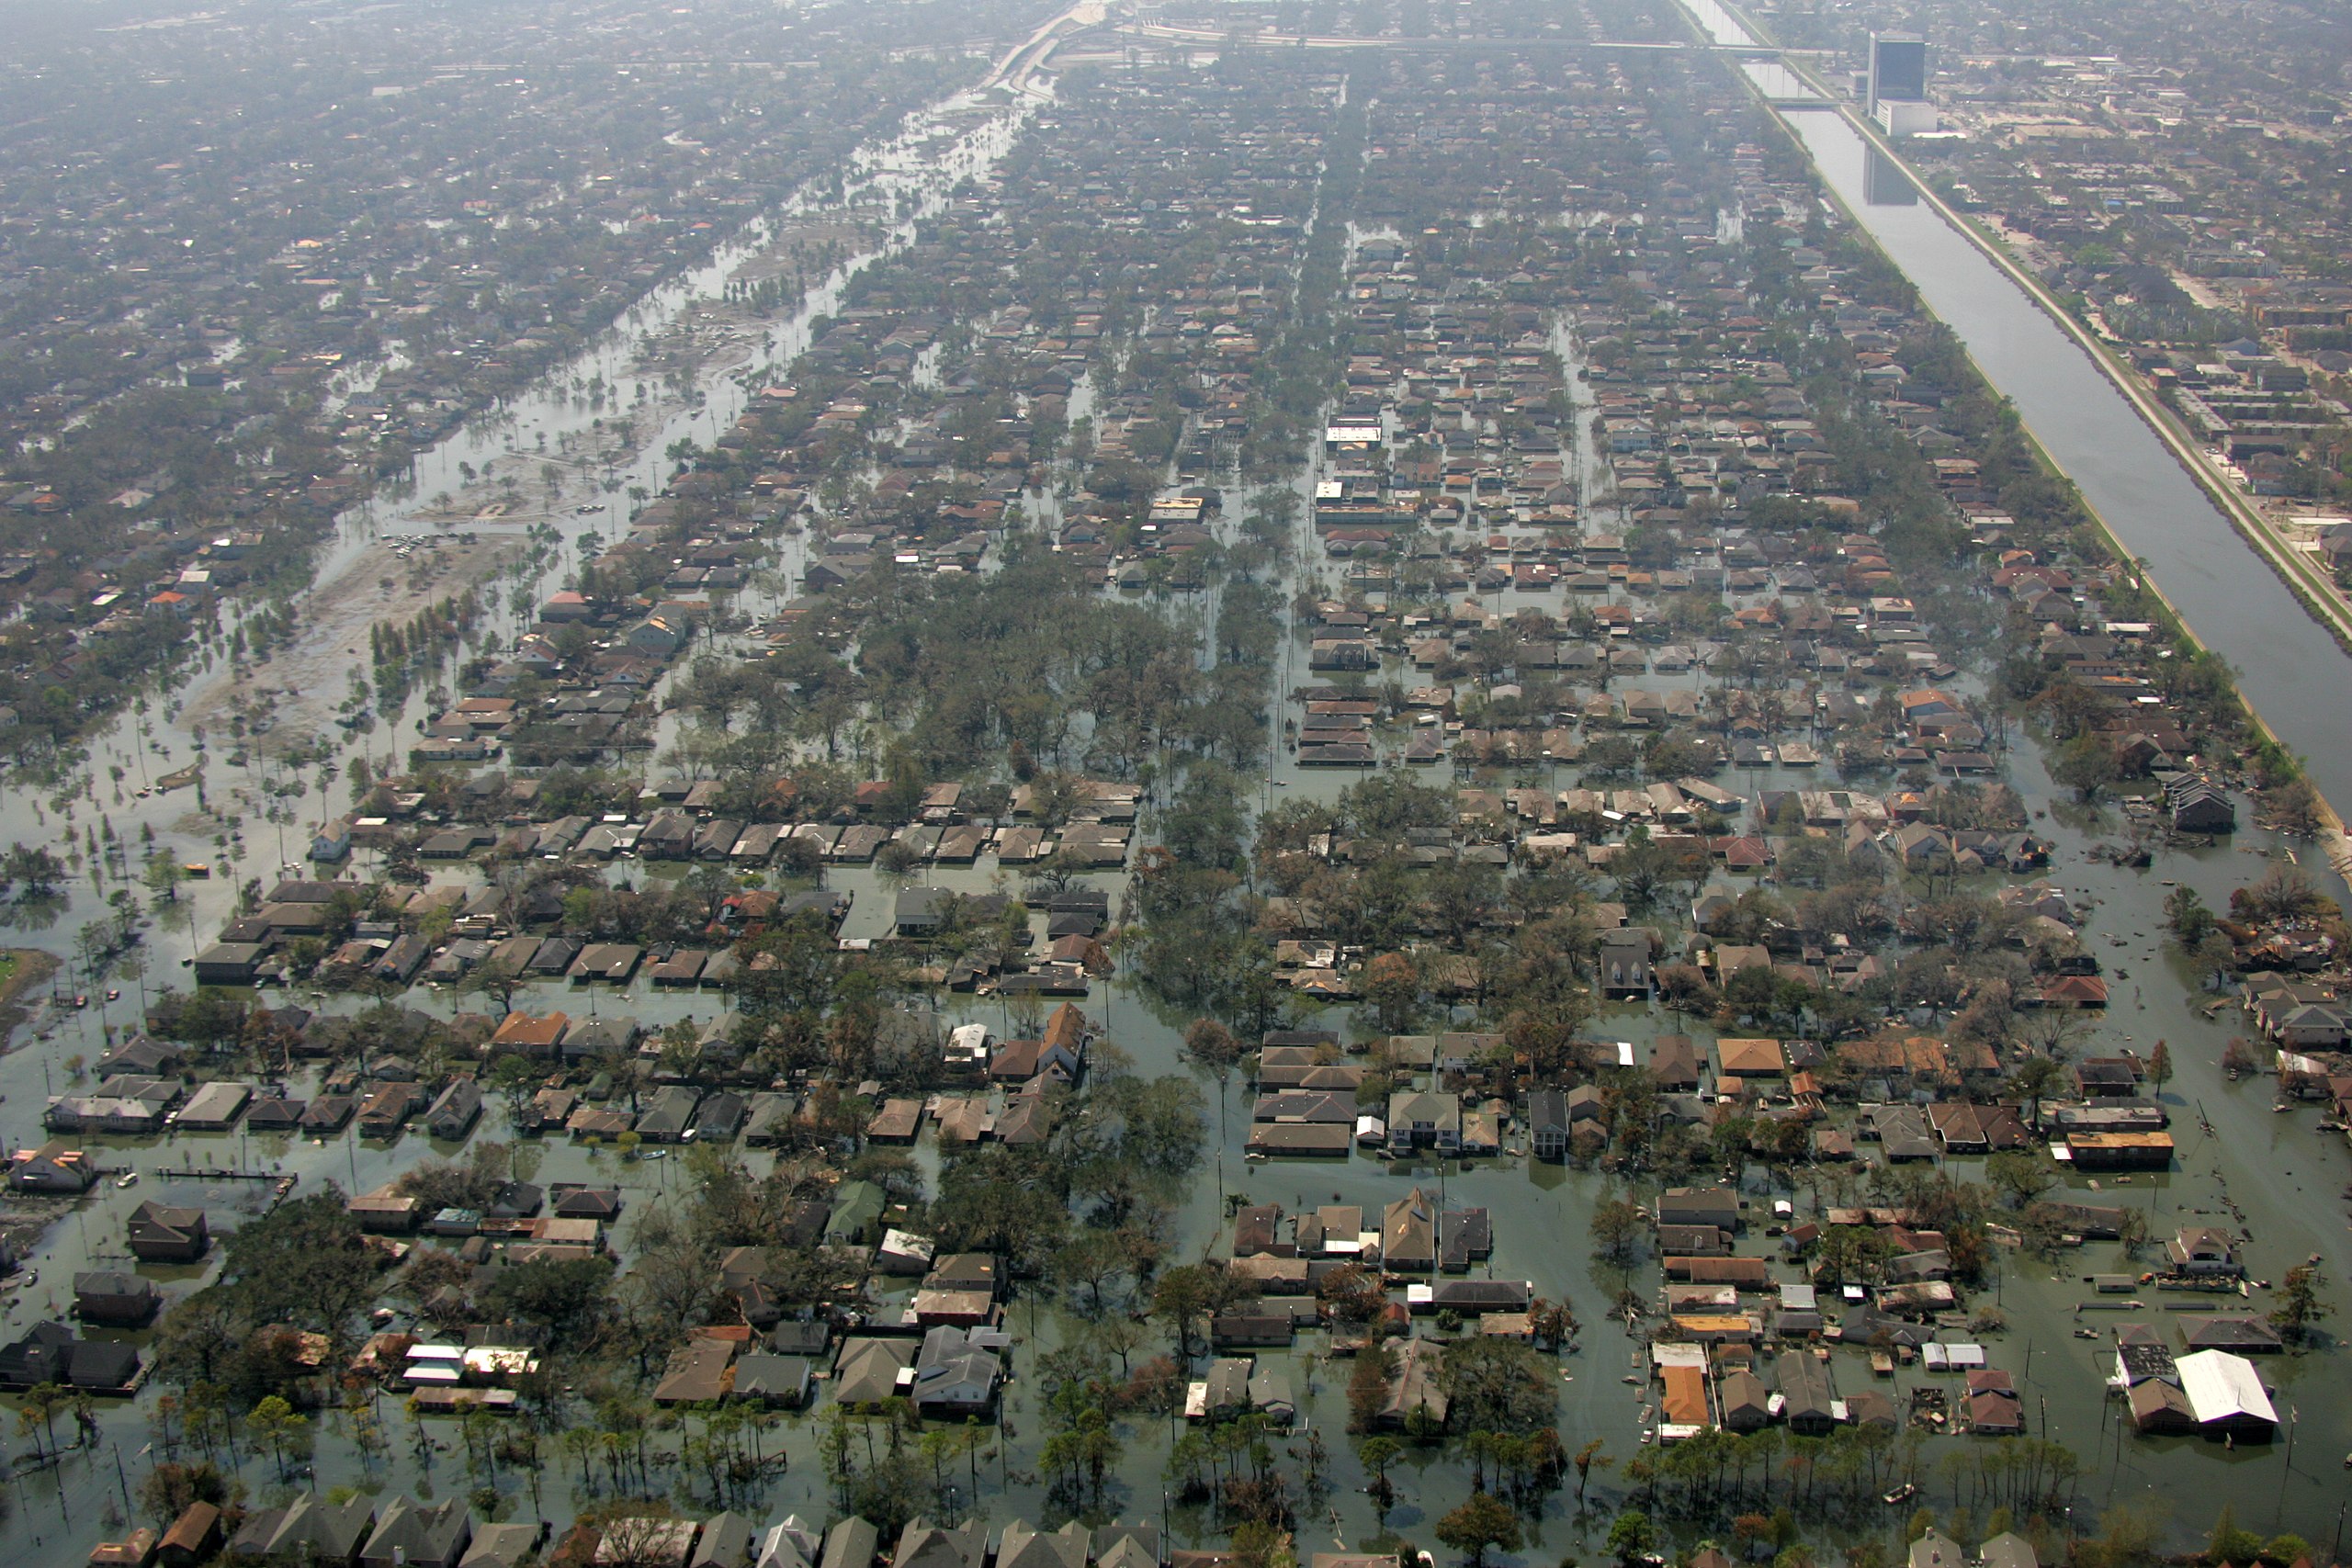 Climate-induced catastrophes, such as Hurricane Katrina, might have been avoided had we heeded the warnings which came as a result of America's Greenest President.